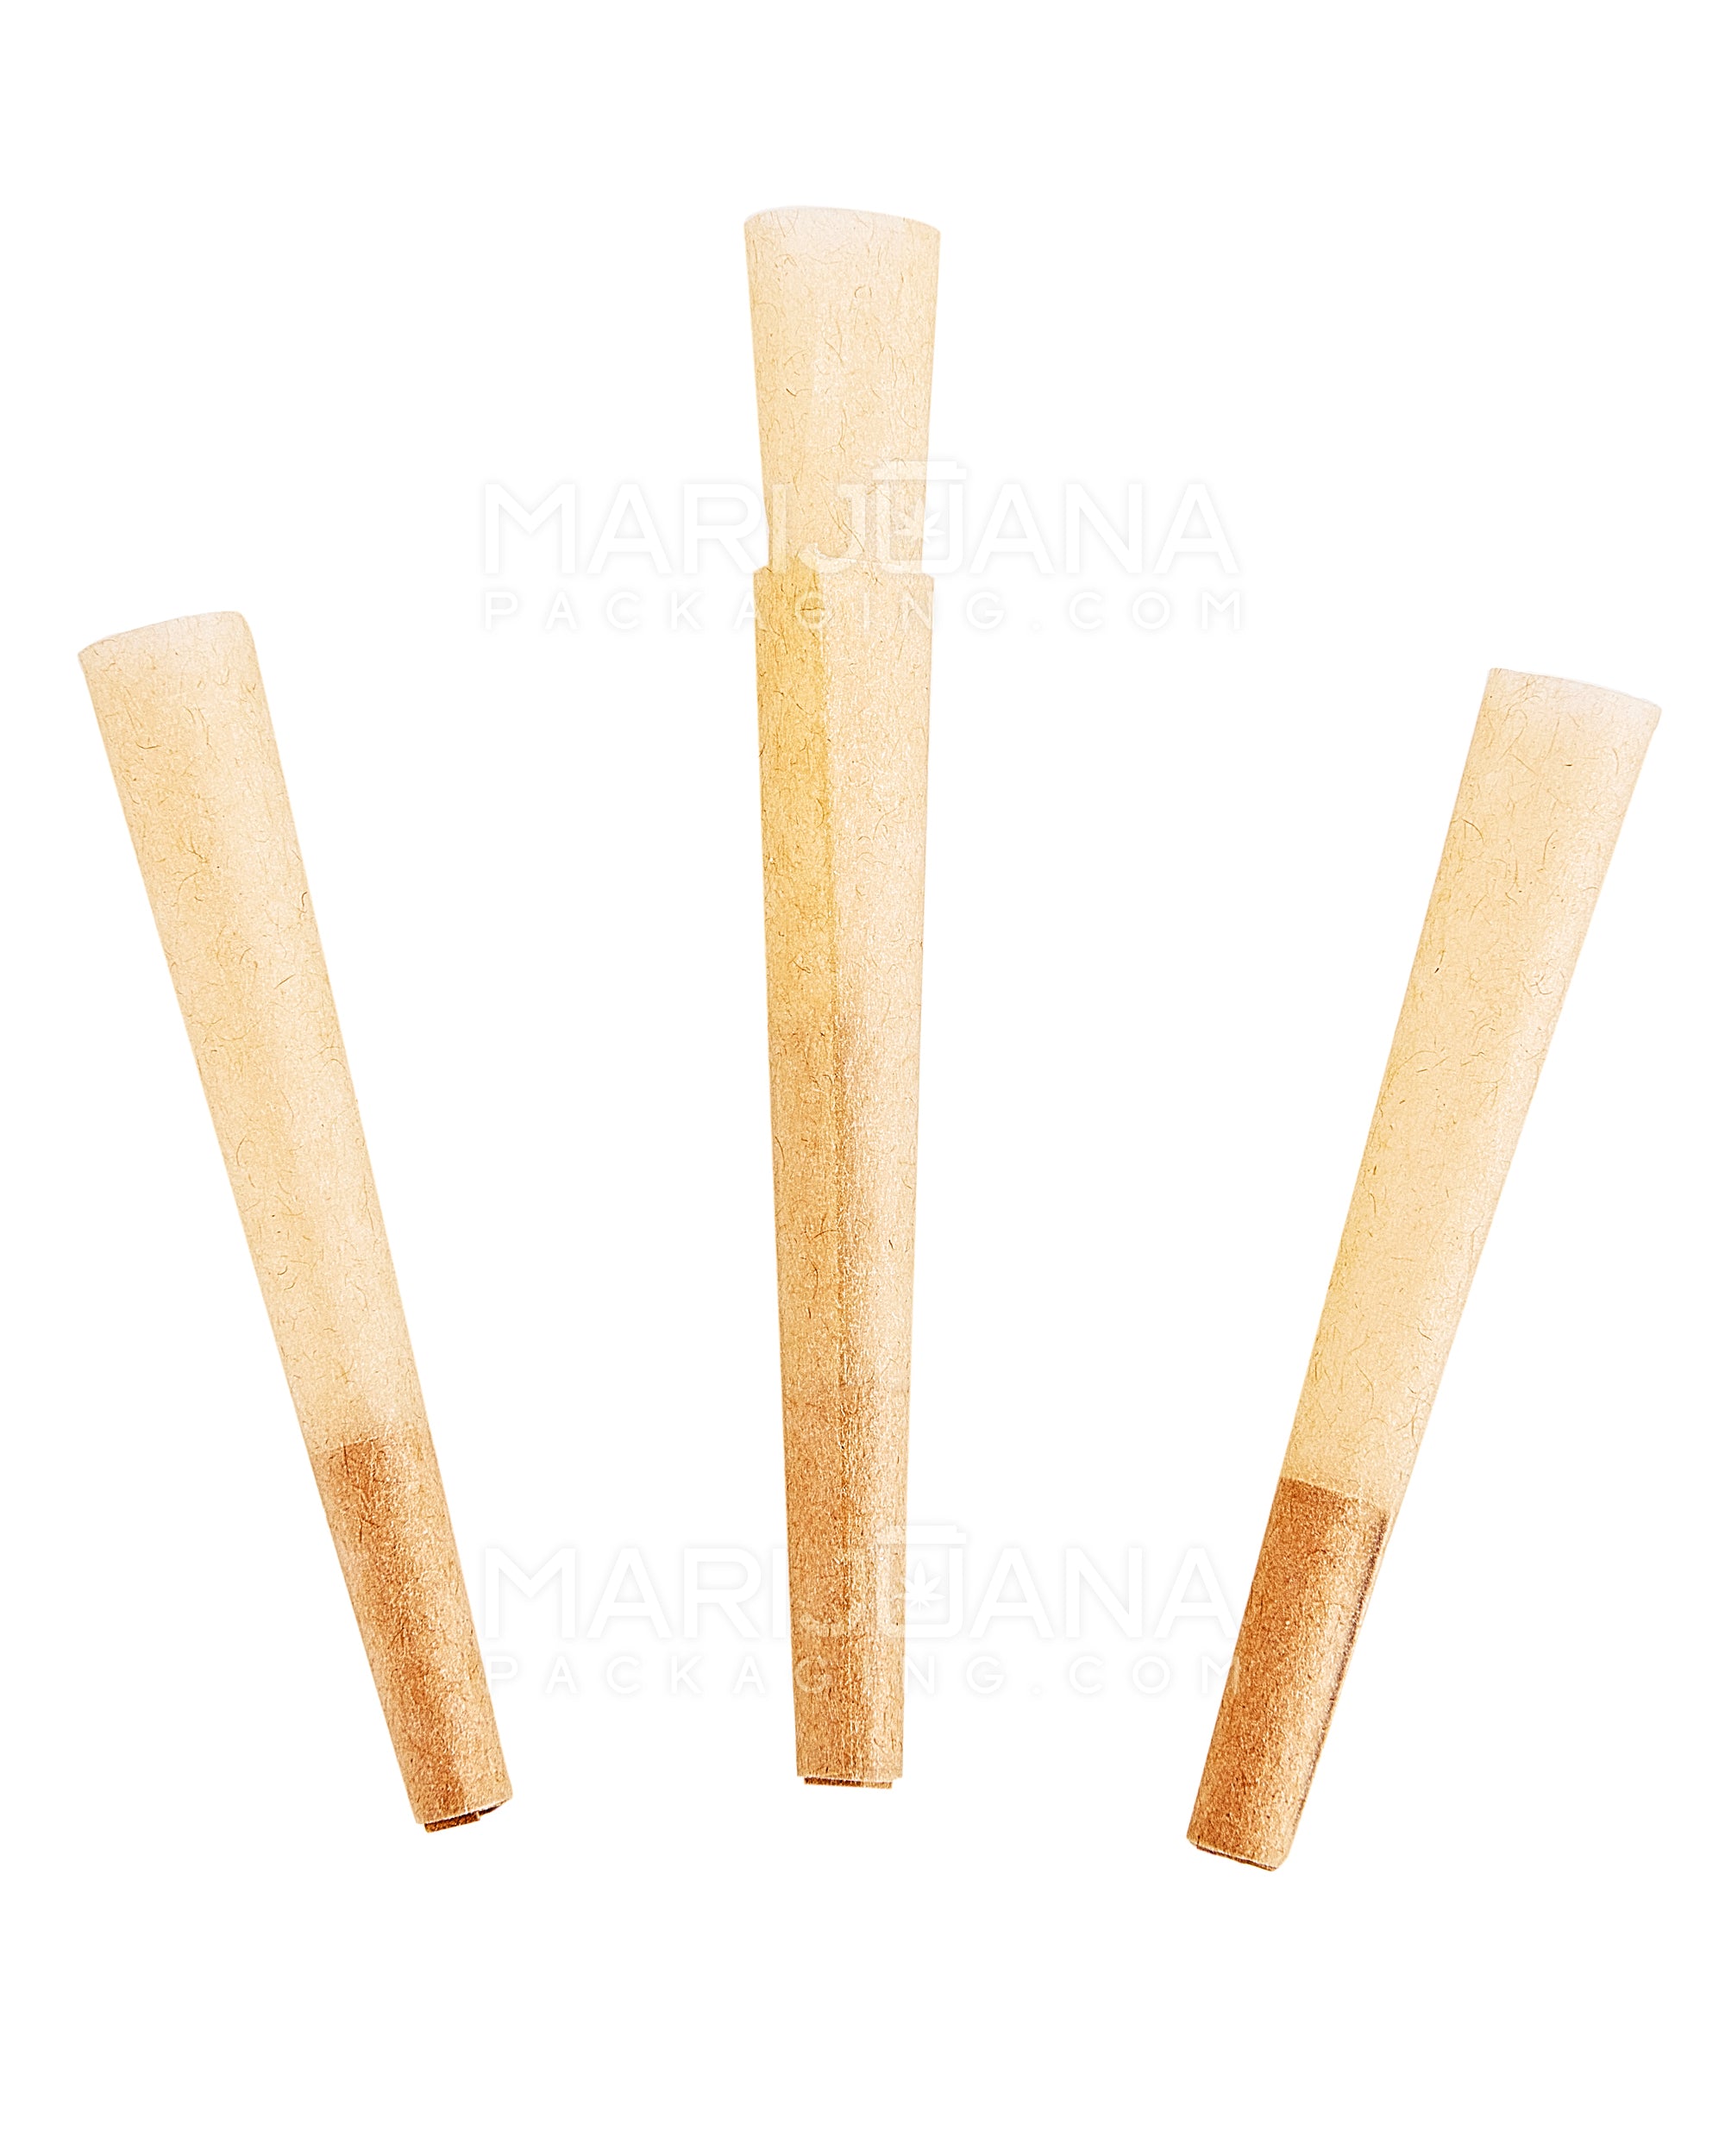 Dog Walker Size Mini Pre-Rolled Cones | 70mm - Brown Paper - 1200 Count - 4